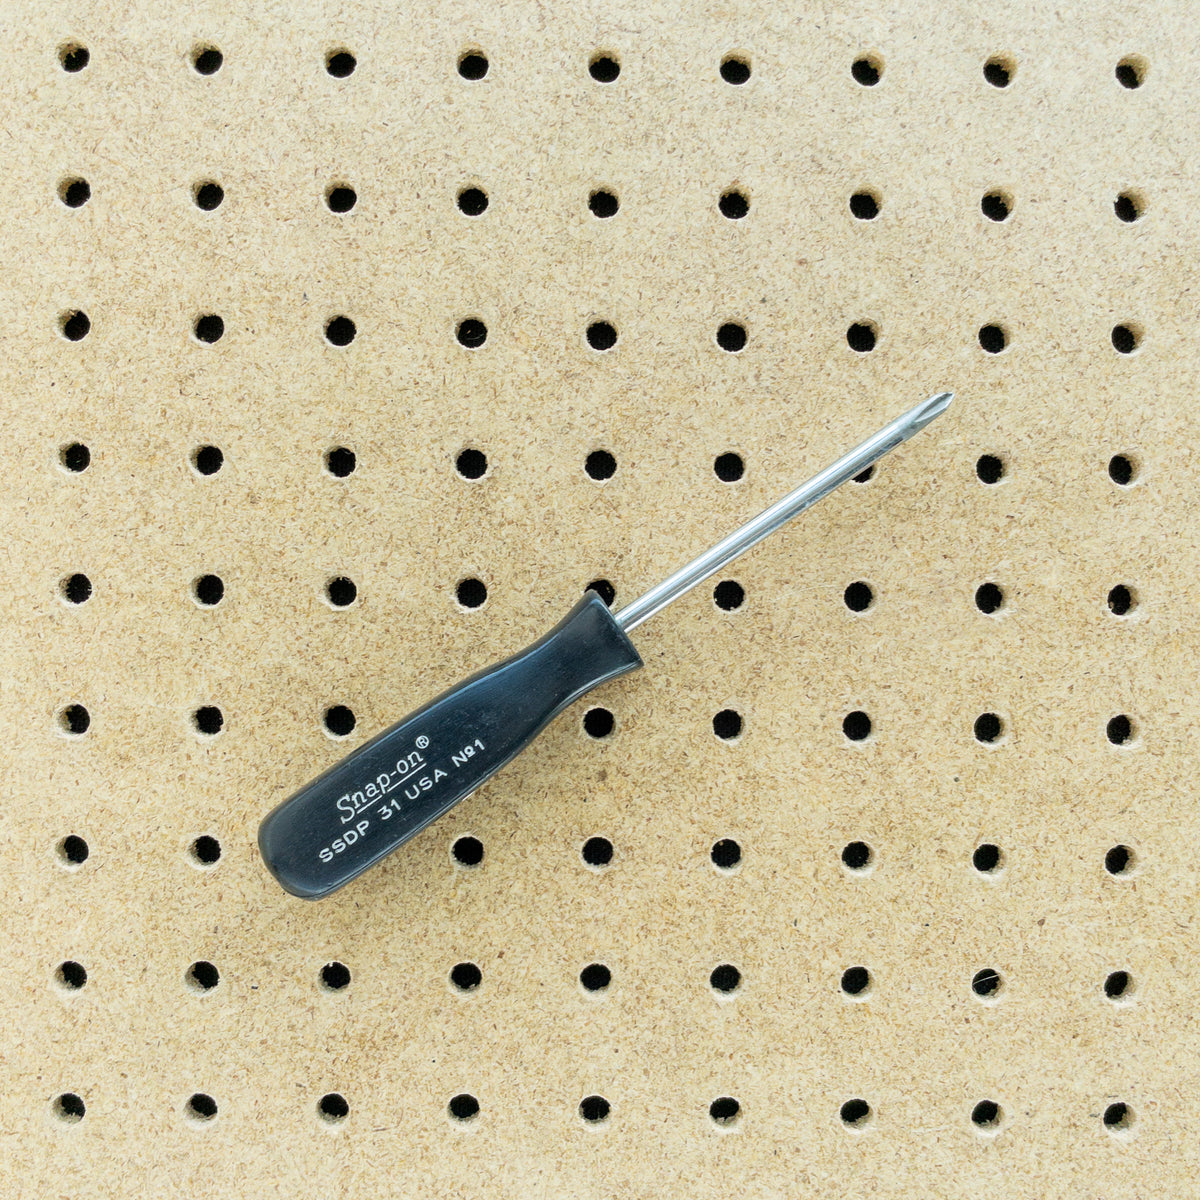 Phillips #1-1HTP31 Details about   Snap On Insulated Composite Electrical Screwdriver 